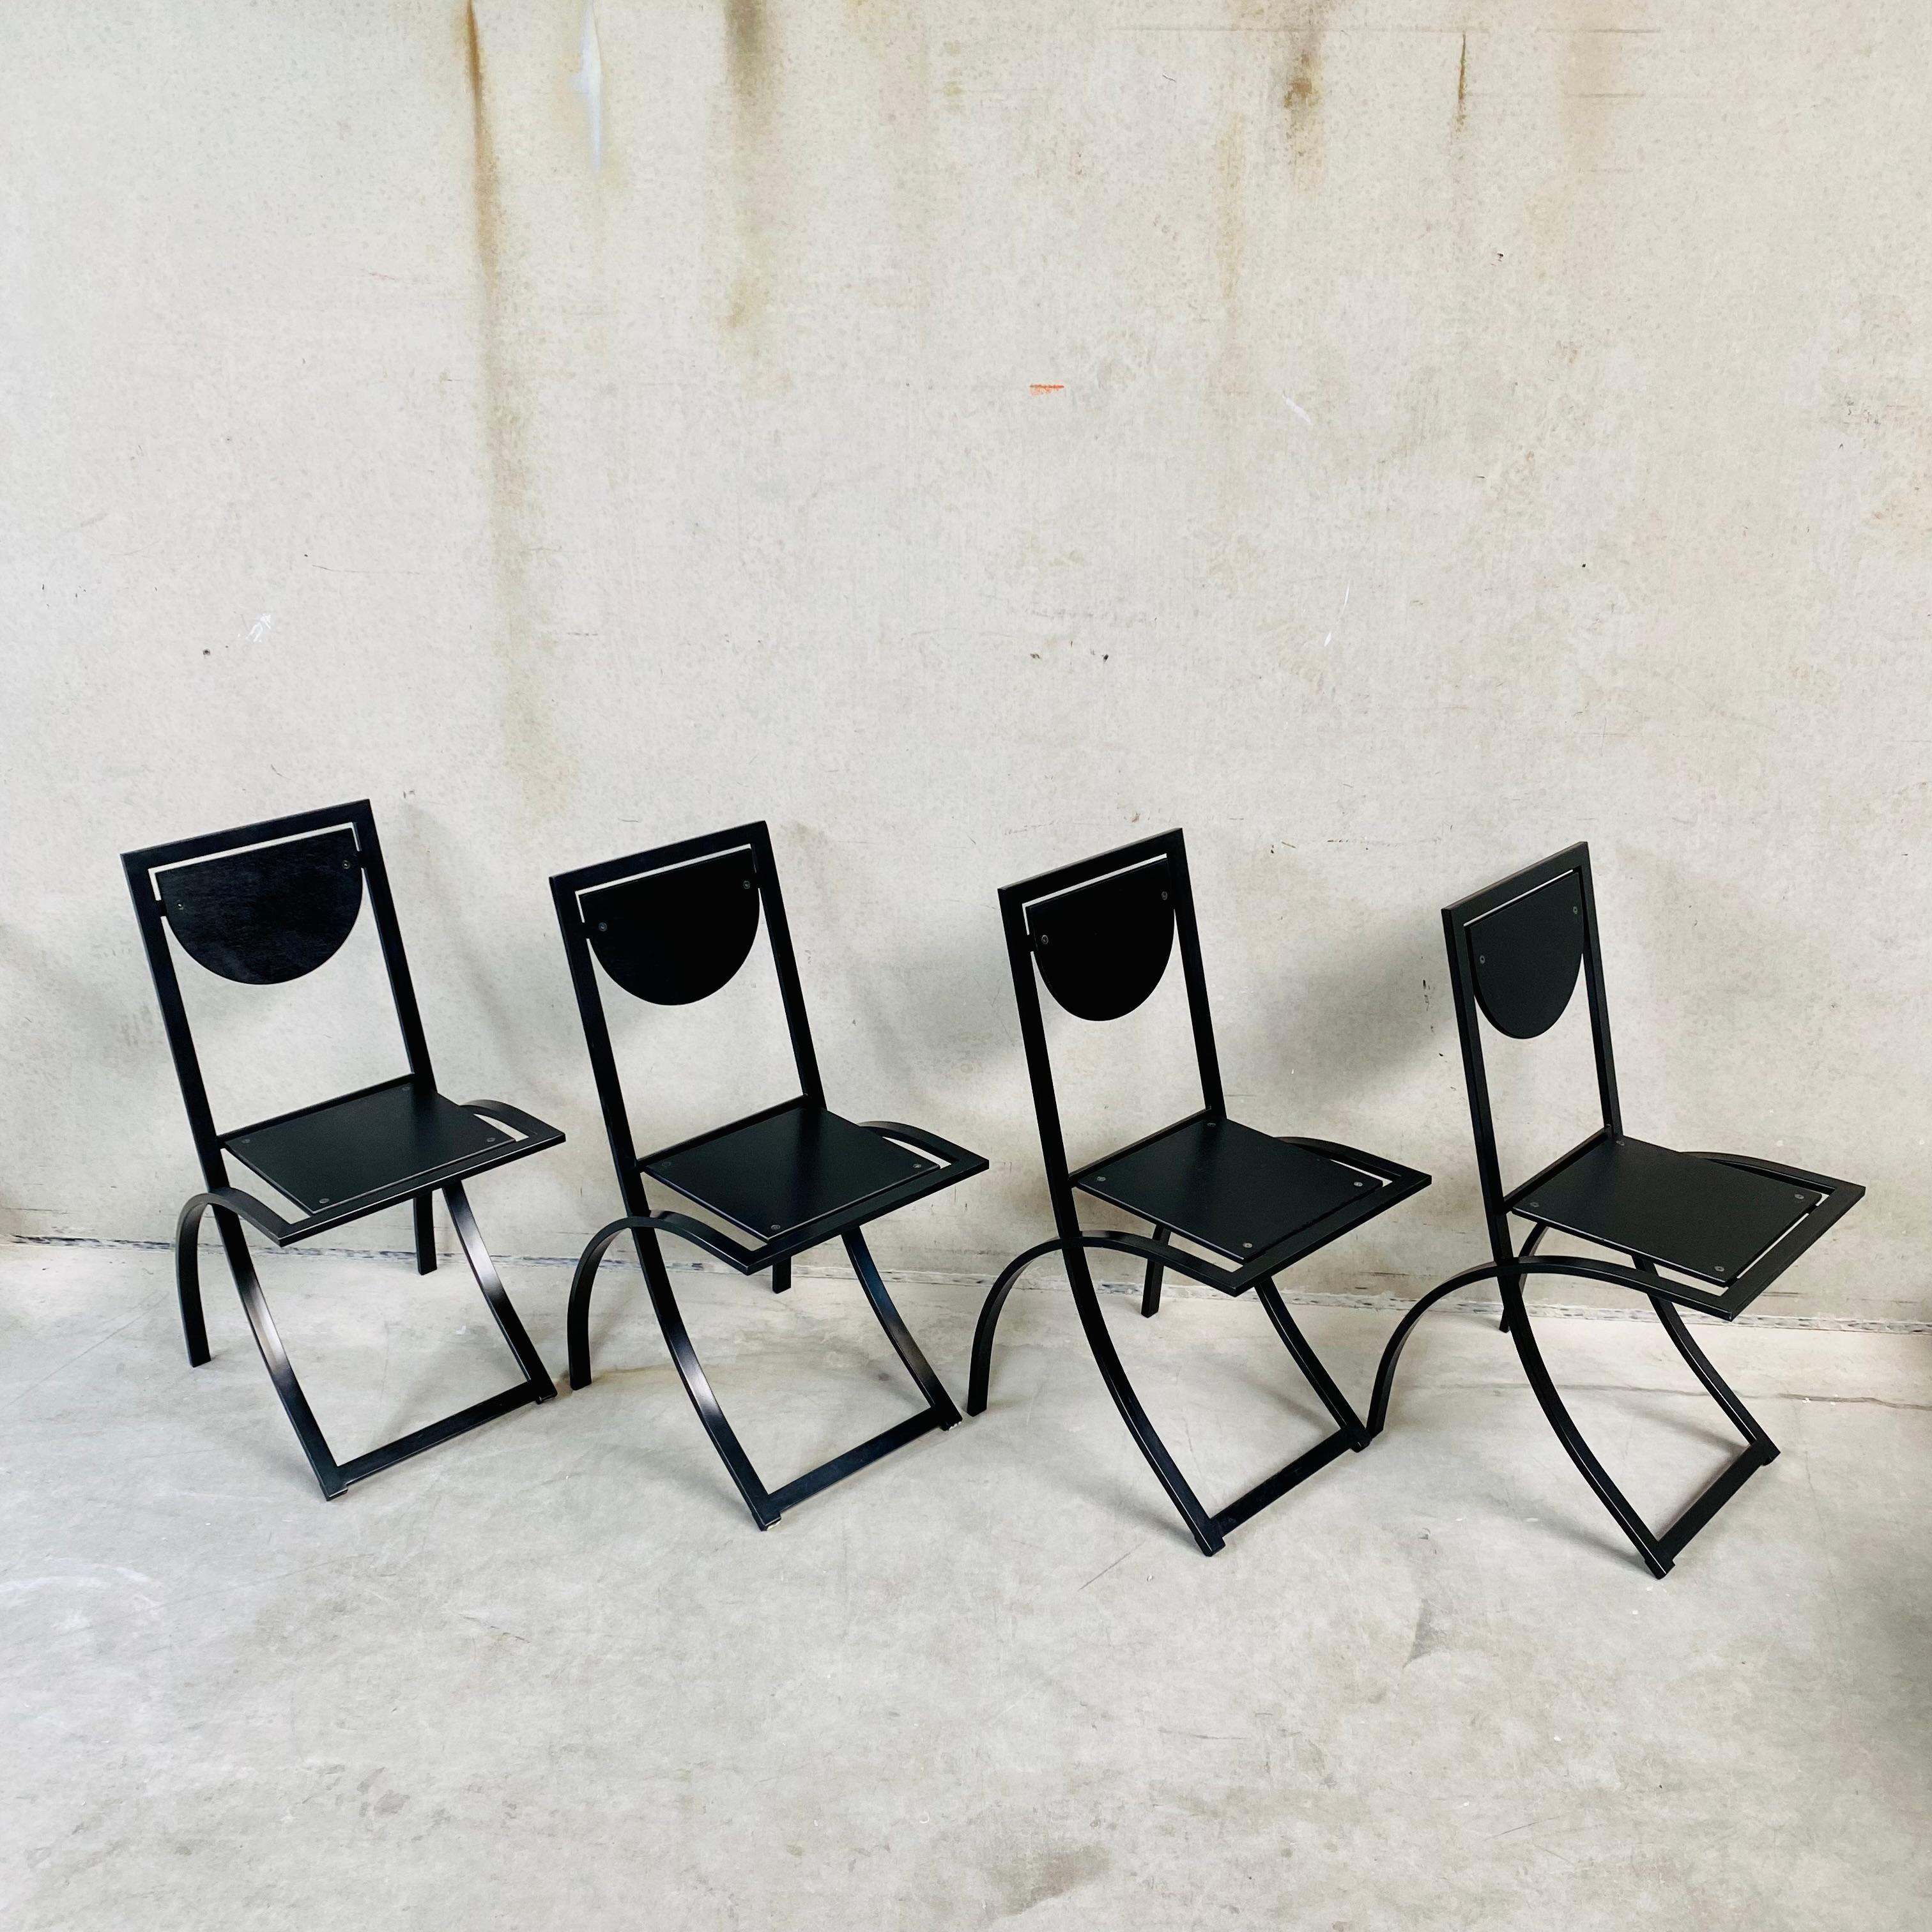 4 x KFF Black Smoked Oak Dining Chairs by Karl Friedrich Förster 1980 For Sale 8